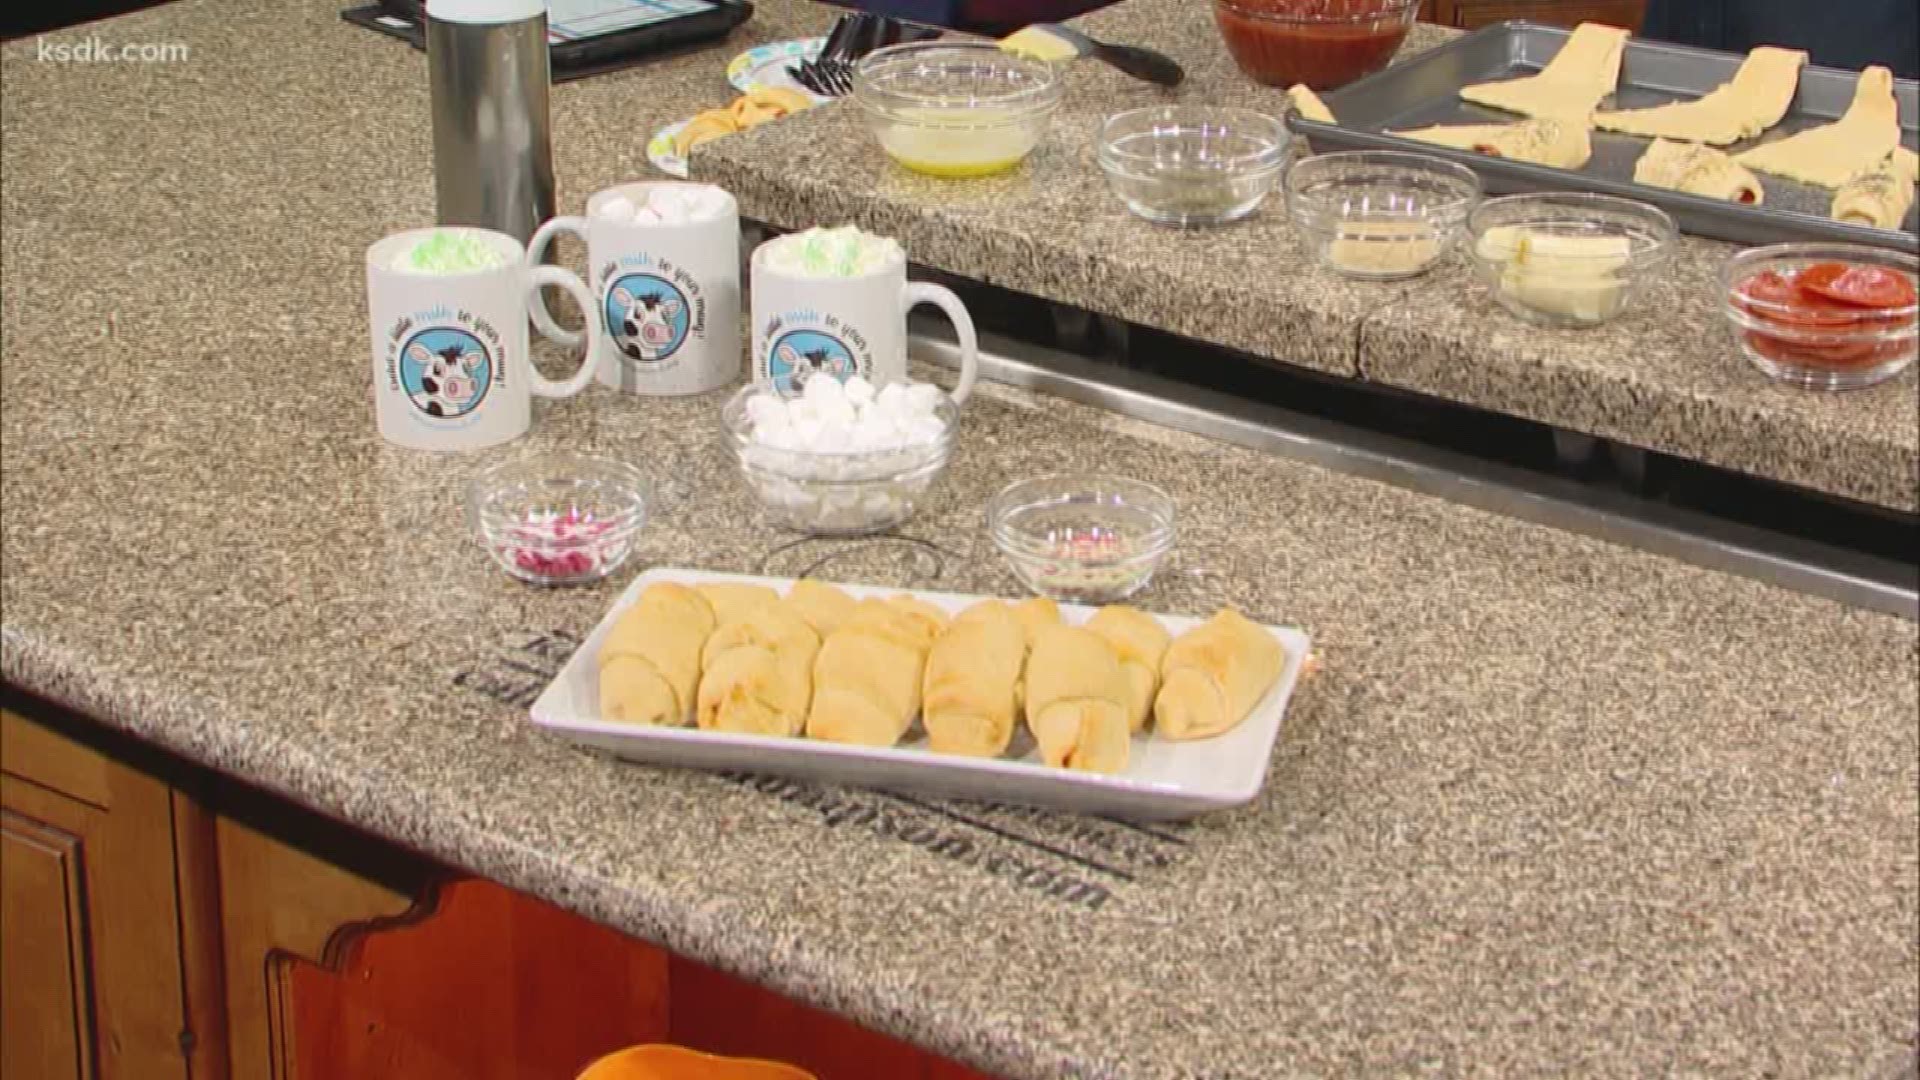 Amanda Marsh of the St. Louis District Dairy Council shares a recipe you can make with the kids!